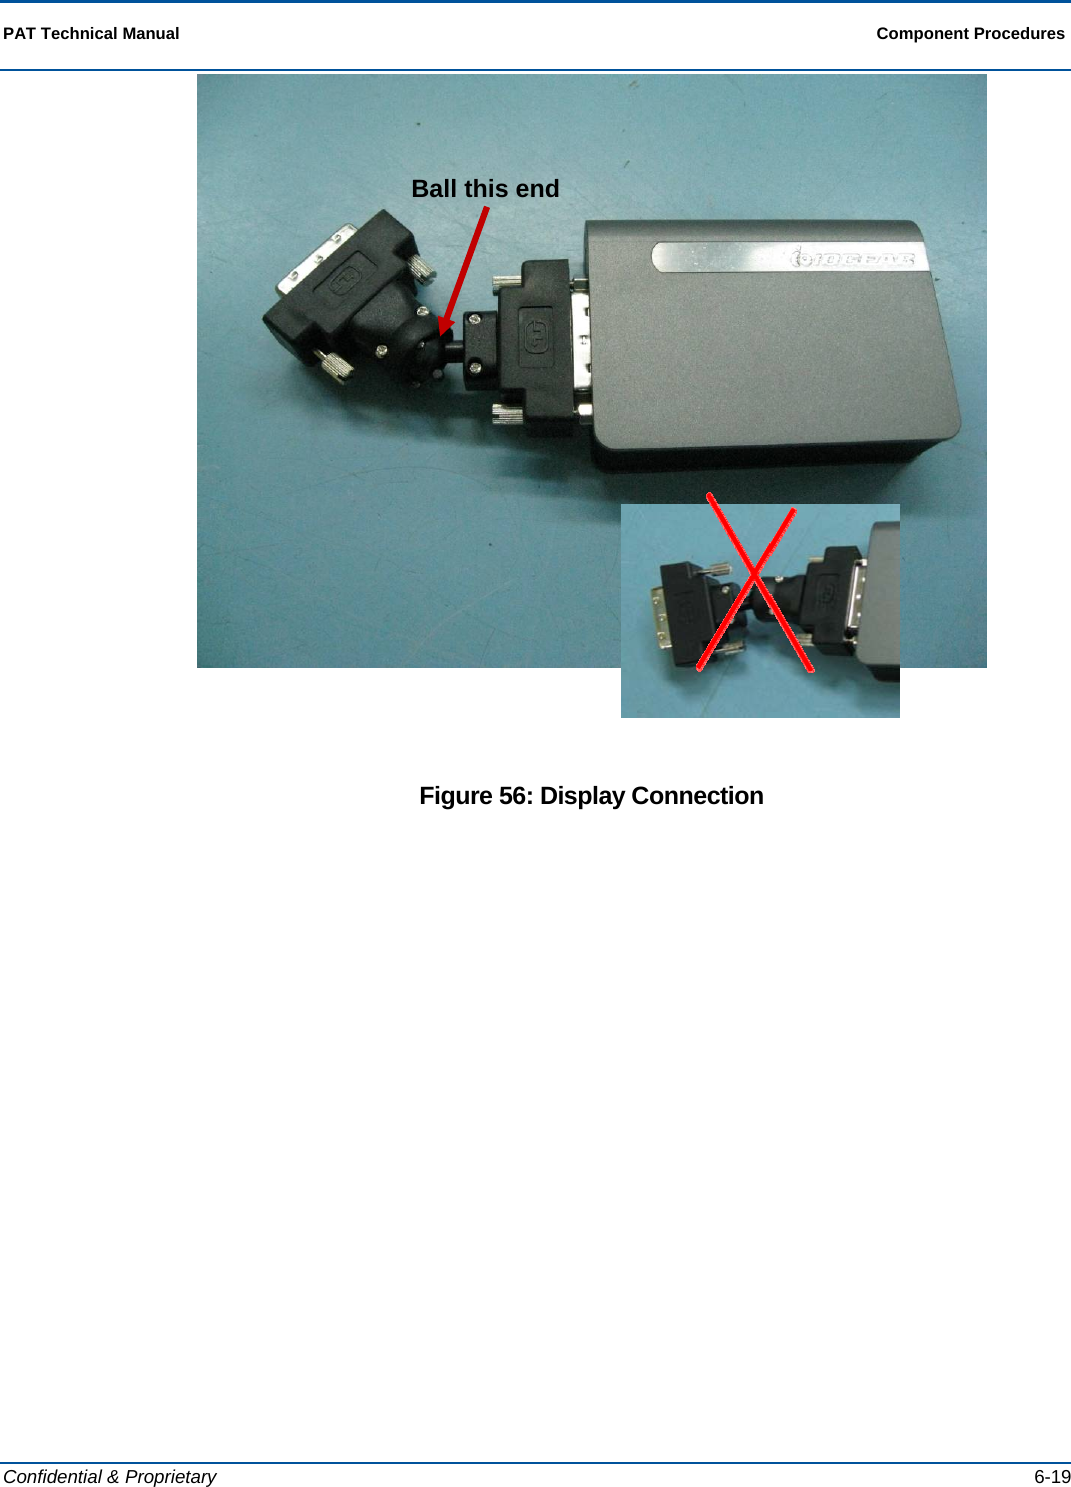  PAT Technical Manual  Component Procedures  Confidential &amp; Proprietary   6-19    Figure 56: Display Connection Ball this end 